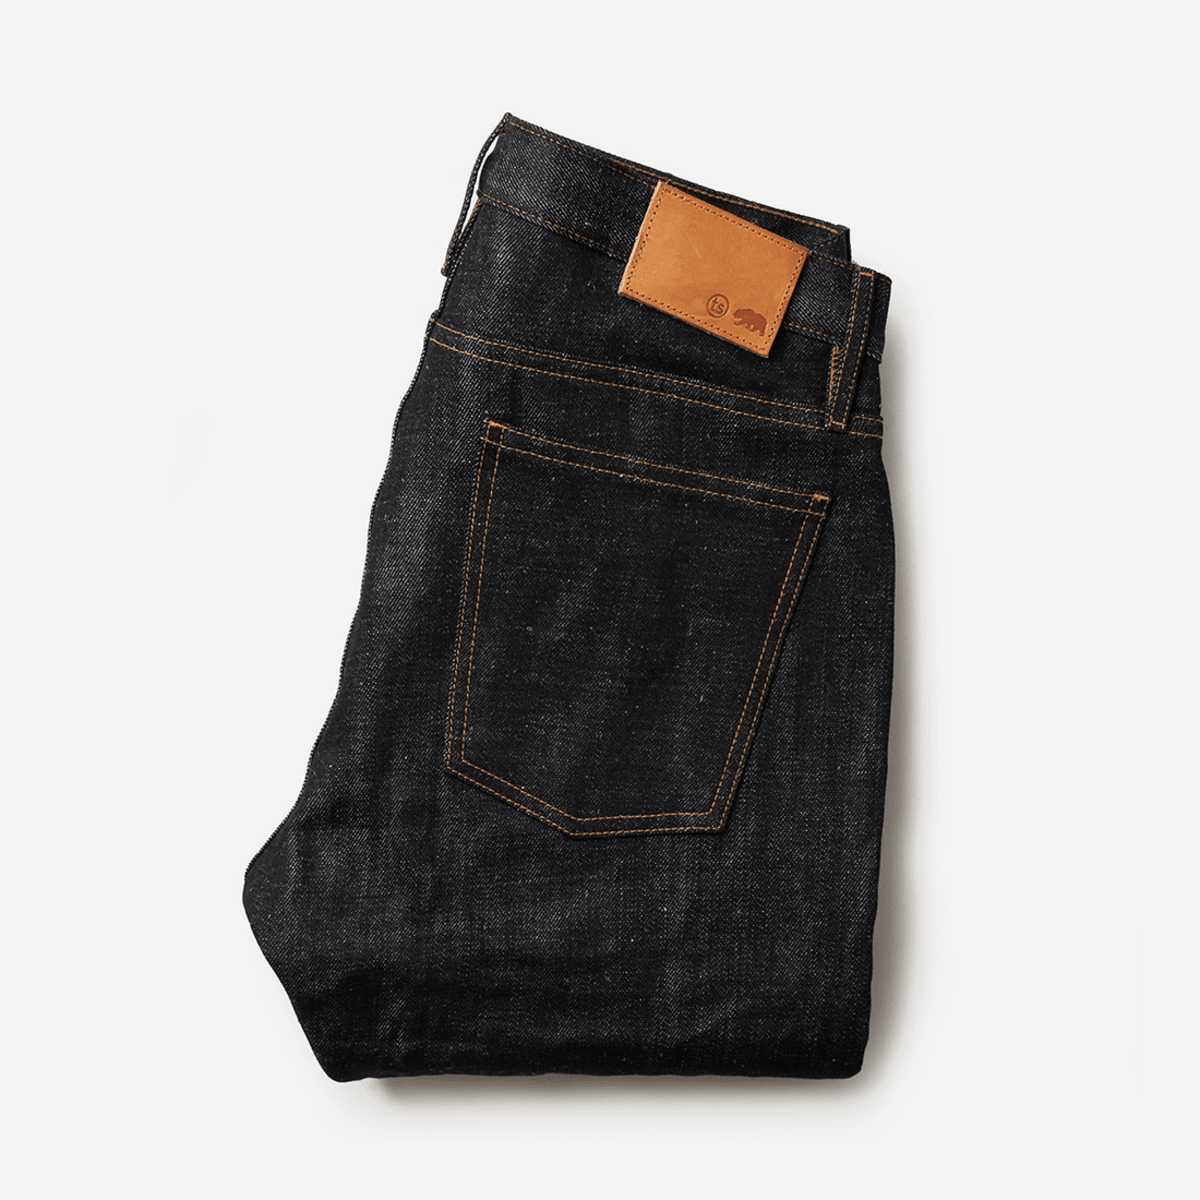 Behold the Softest, Sturdiest Japanese Selvage Jeans Ever - Airows